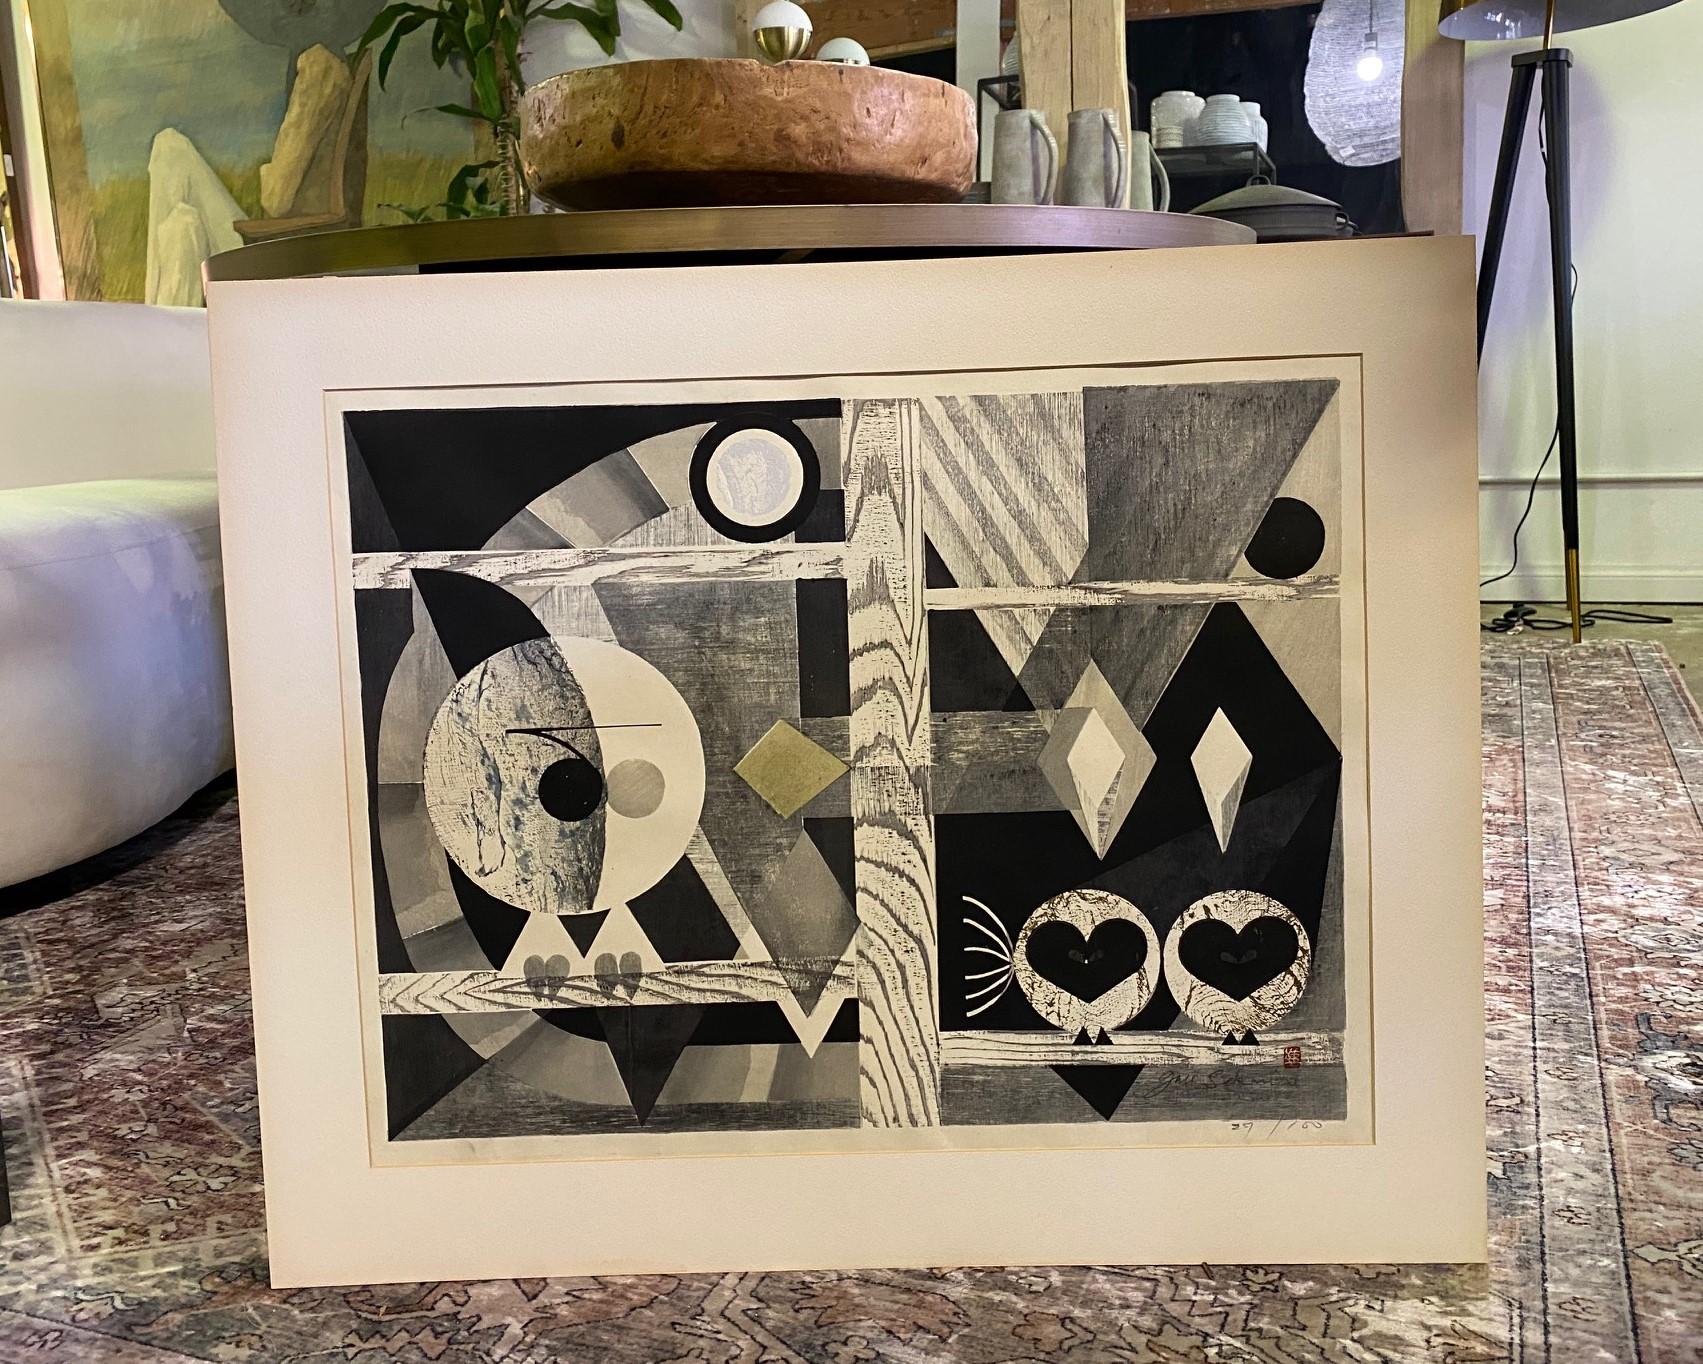 A wonderful, geometrically composed, and deeply colored, limited edition woodblock print by famed Japanese artist Junichiro Sekino. A rare abstract work featuring owls or bids. Apparently, quite a scarce and rare image by the master printmakers.